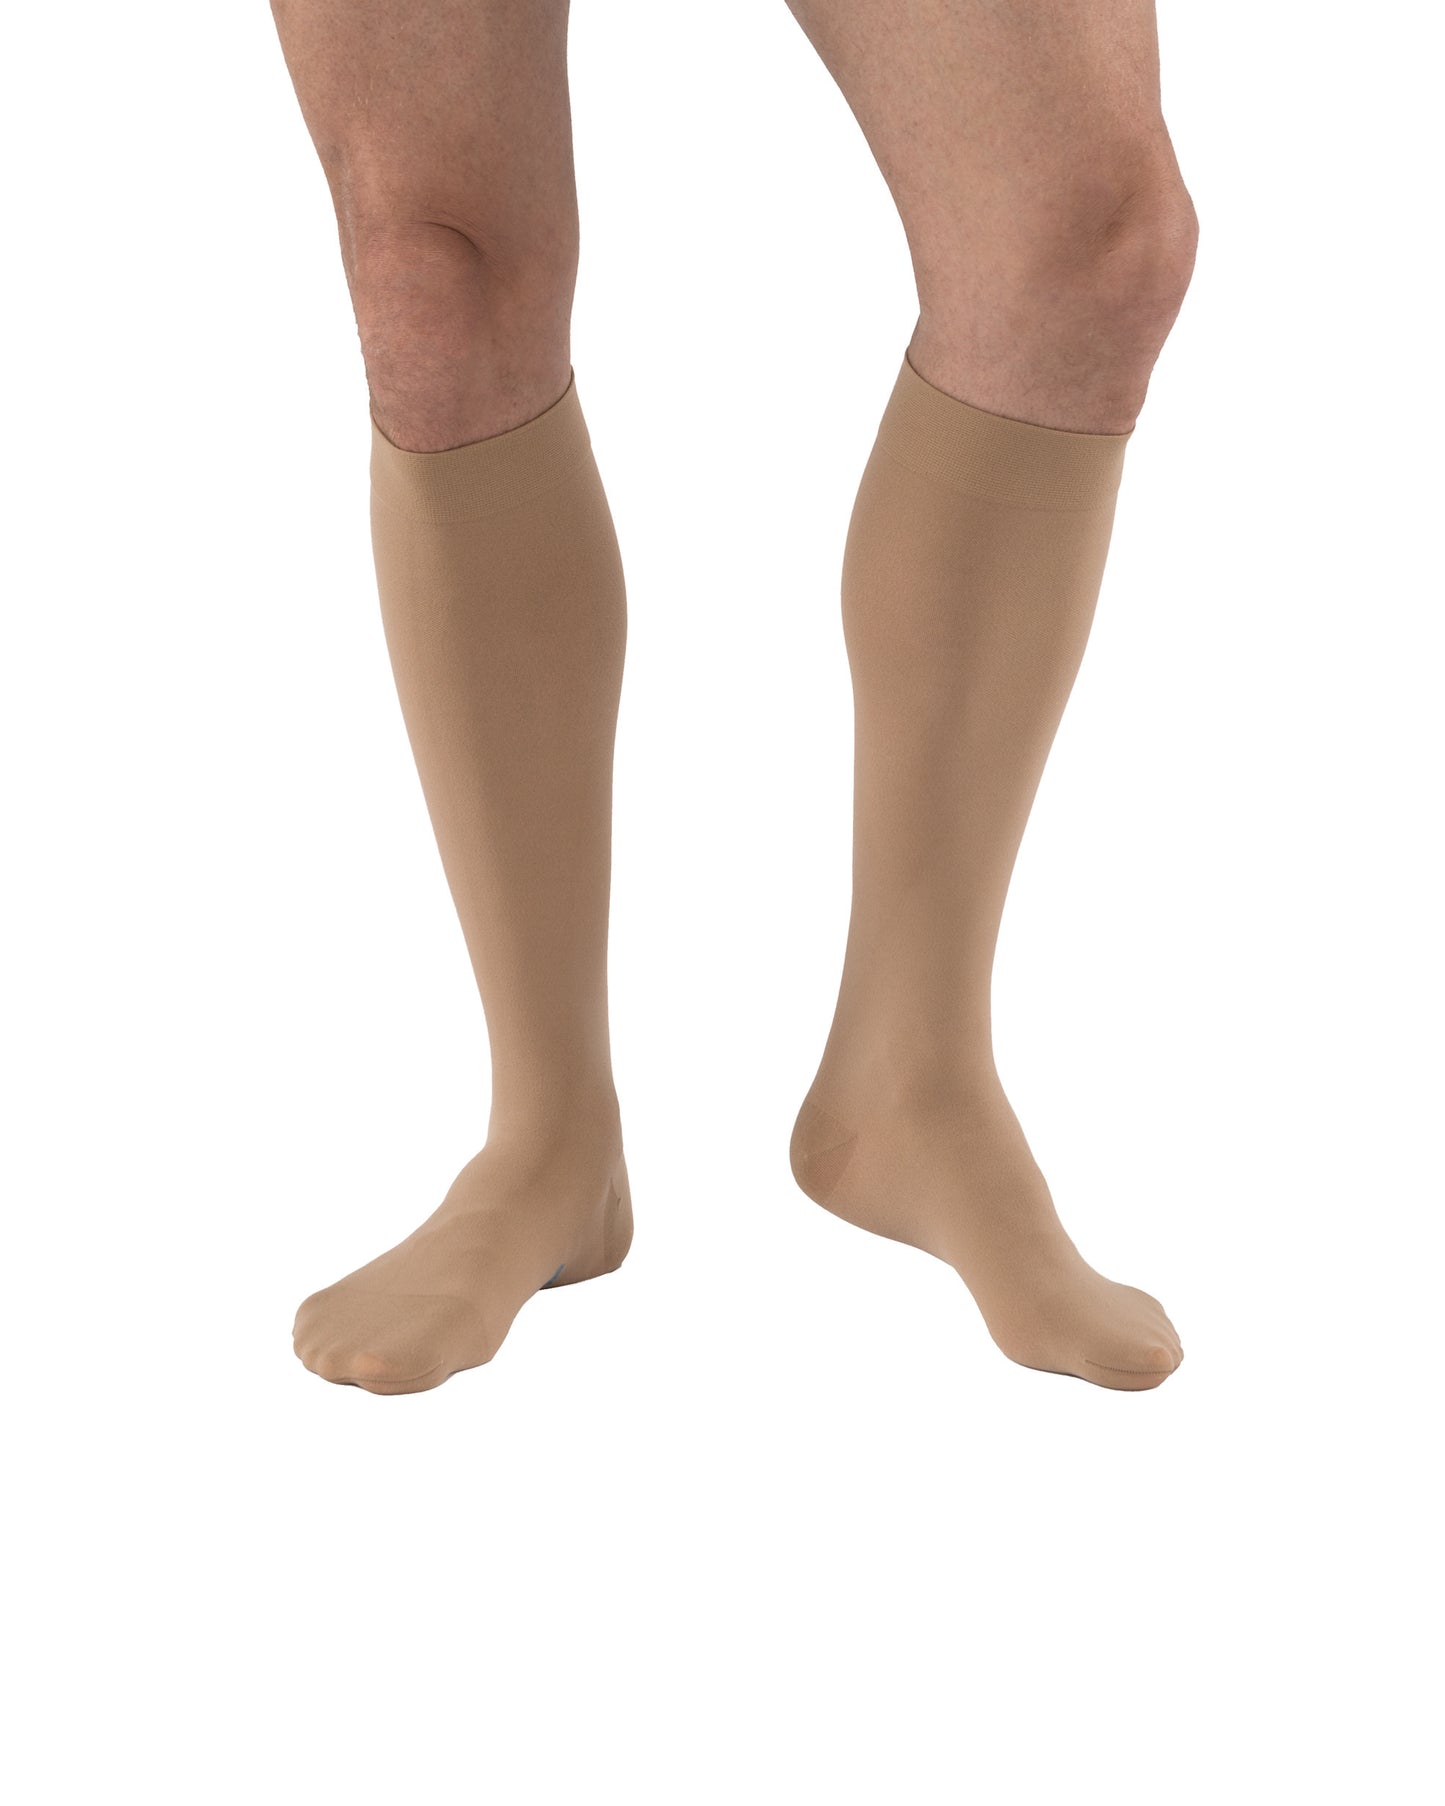 JOBST Relief Compression Stockings 20-30 mmHg Knee High Closed Toe